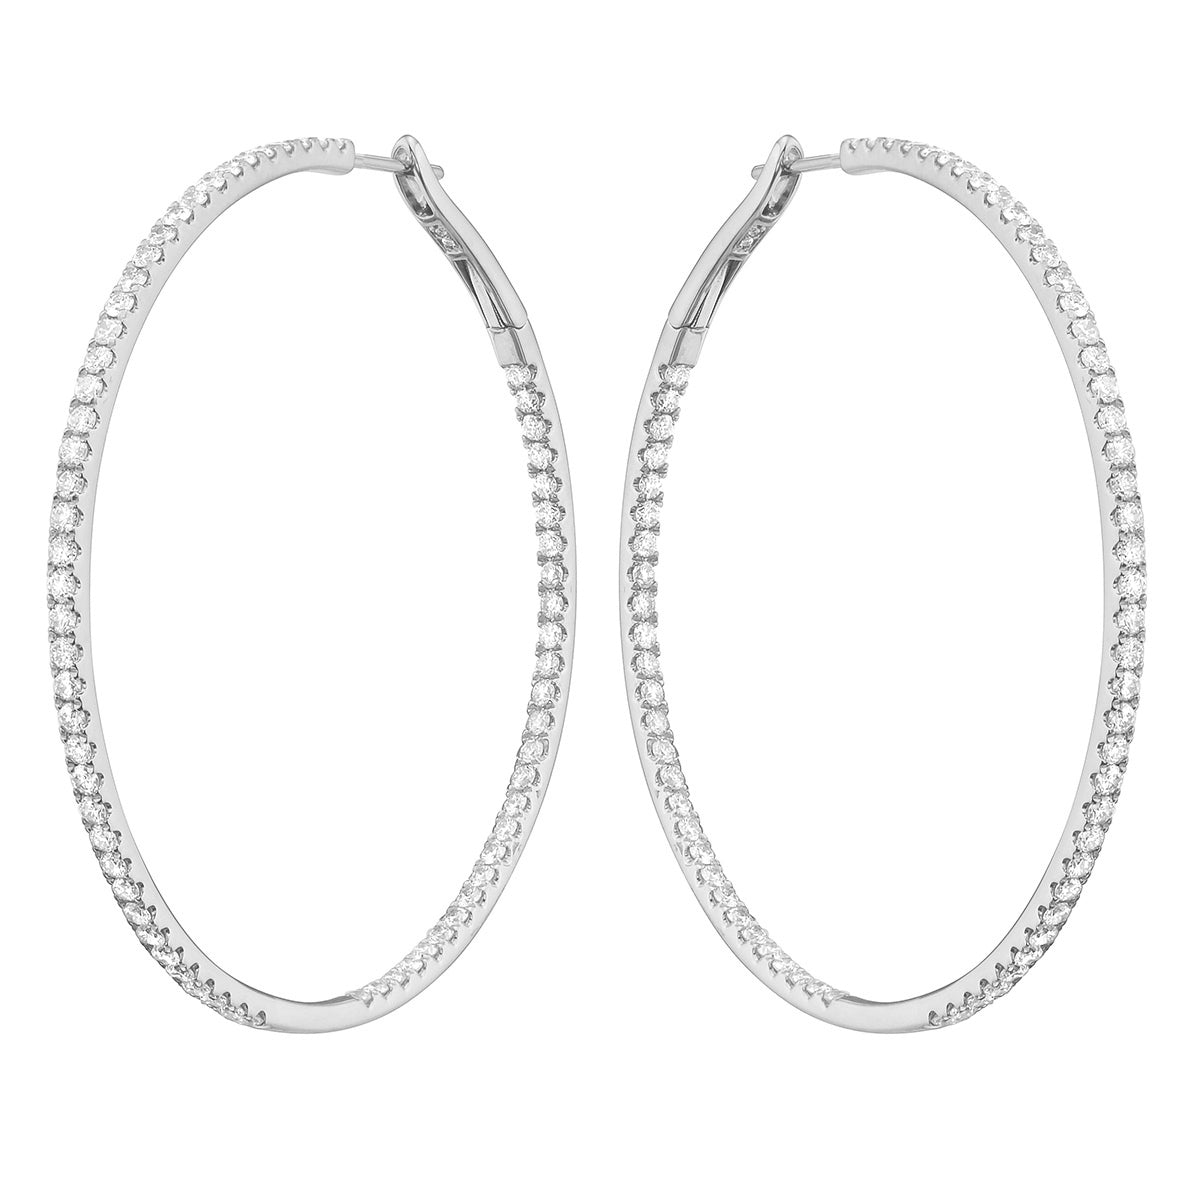 2.0in White Gold Inside and Out Diamond Hoop Earrings